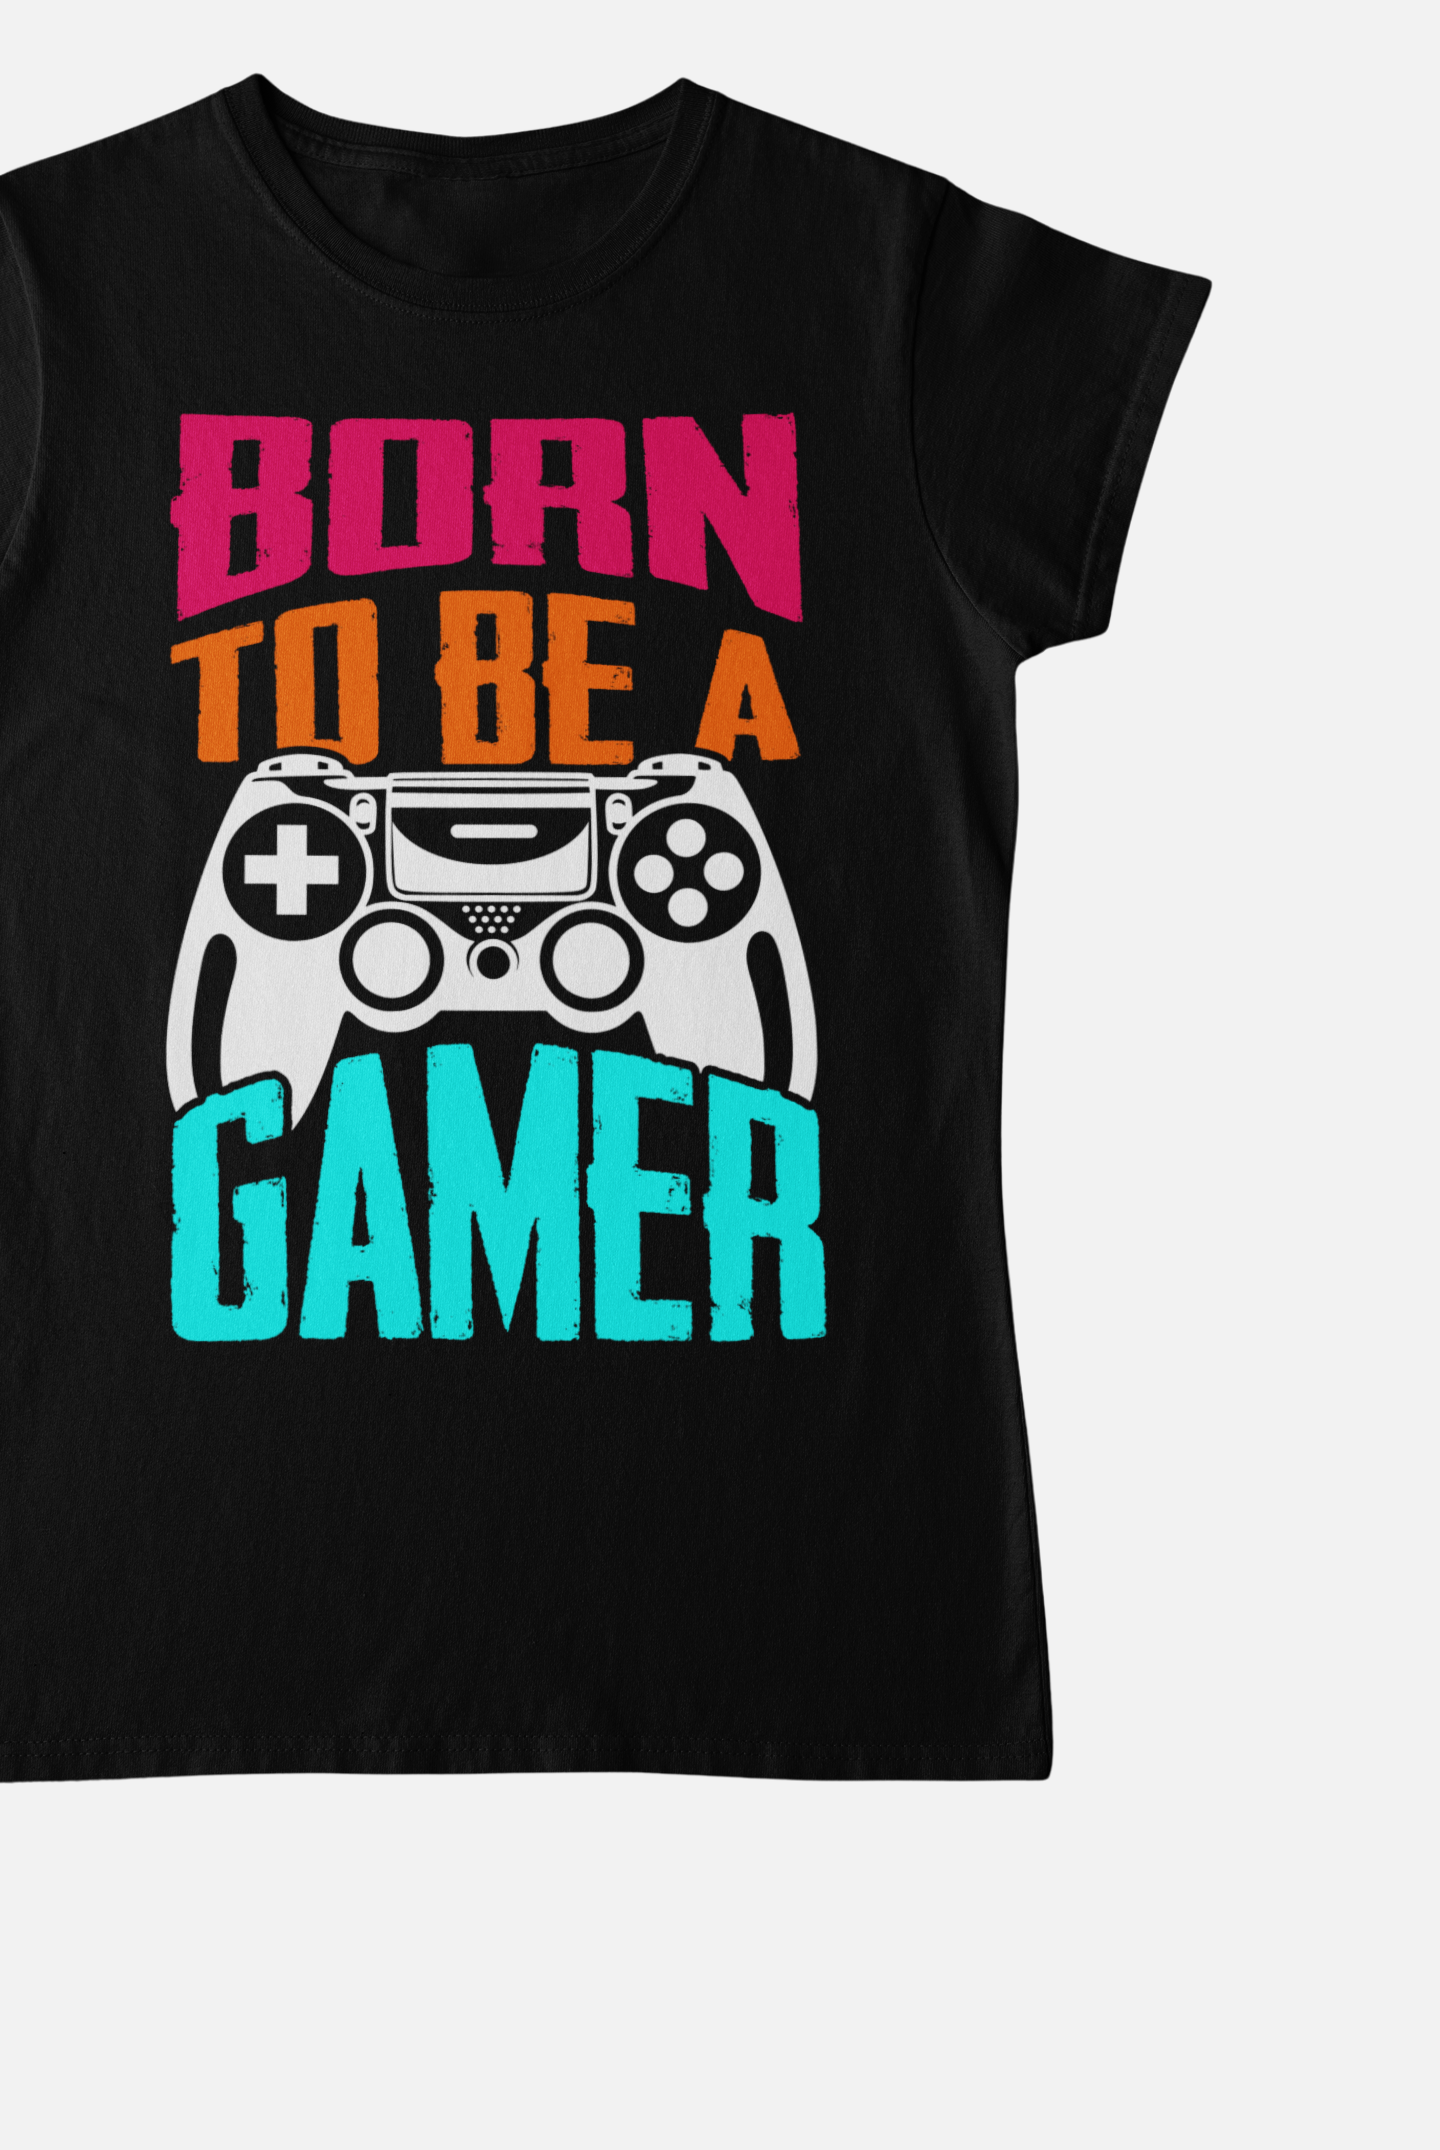 Born To Be A Gamer Black Round Neck T-Shirt for Women